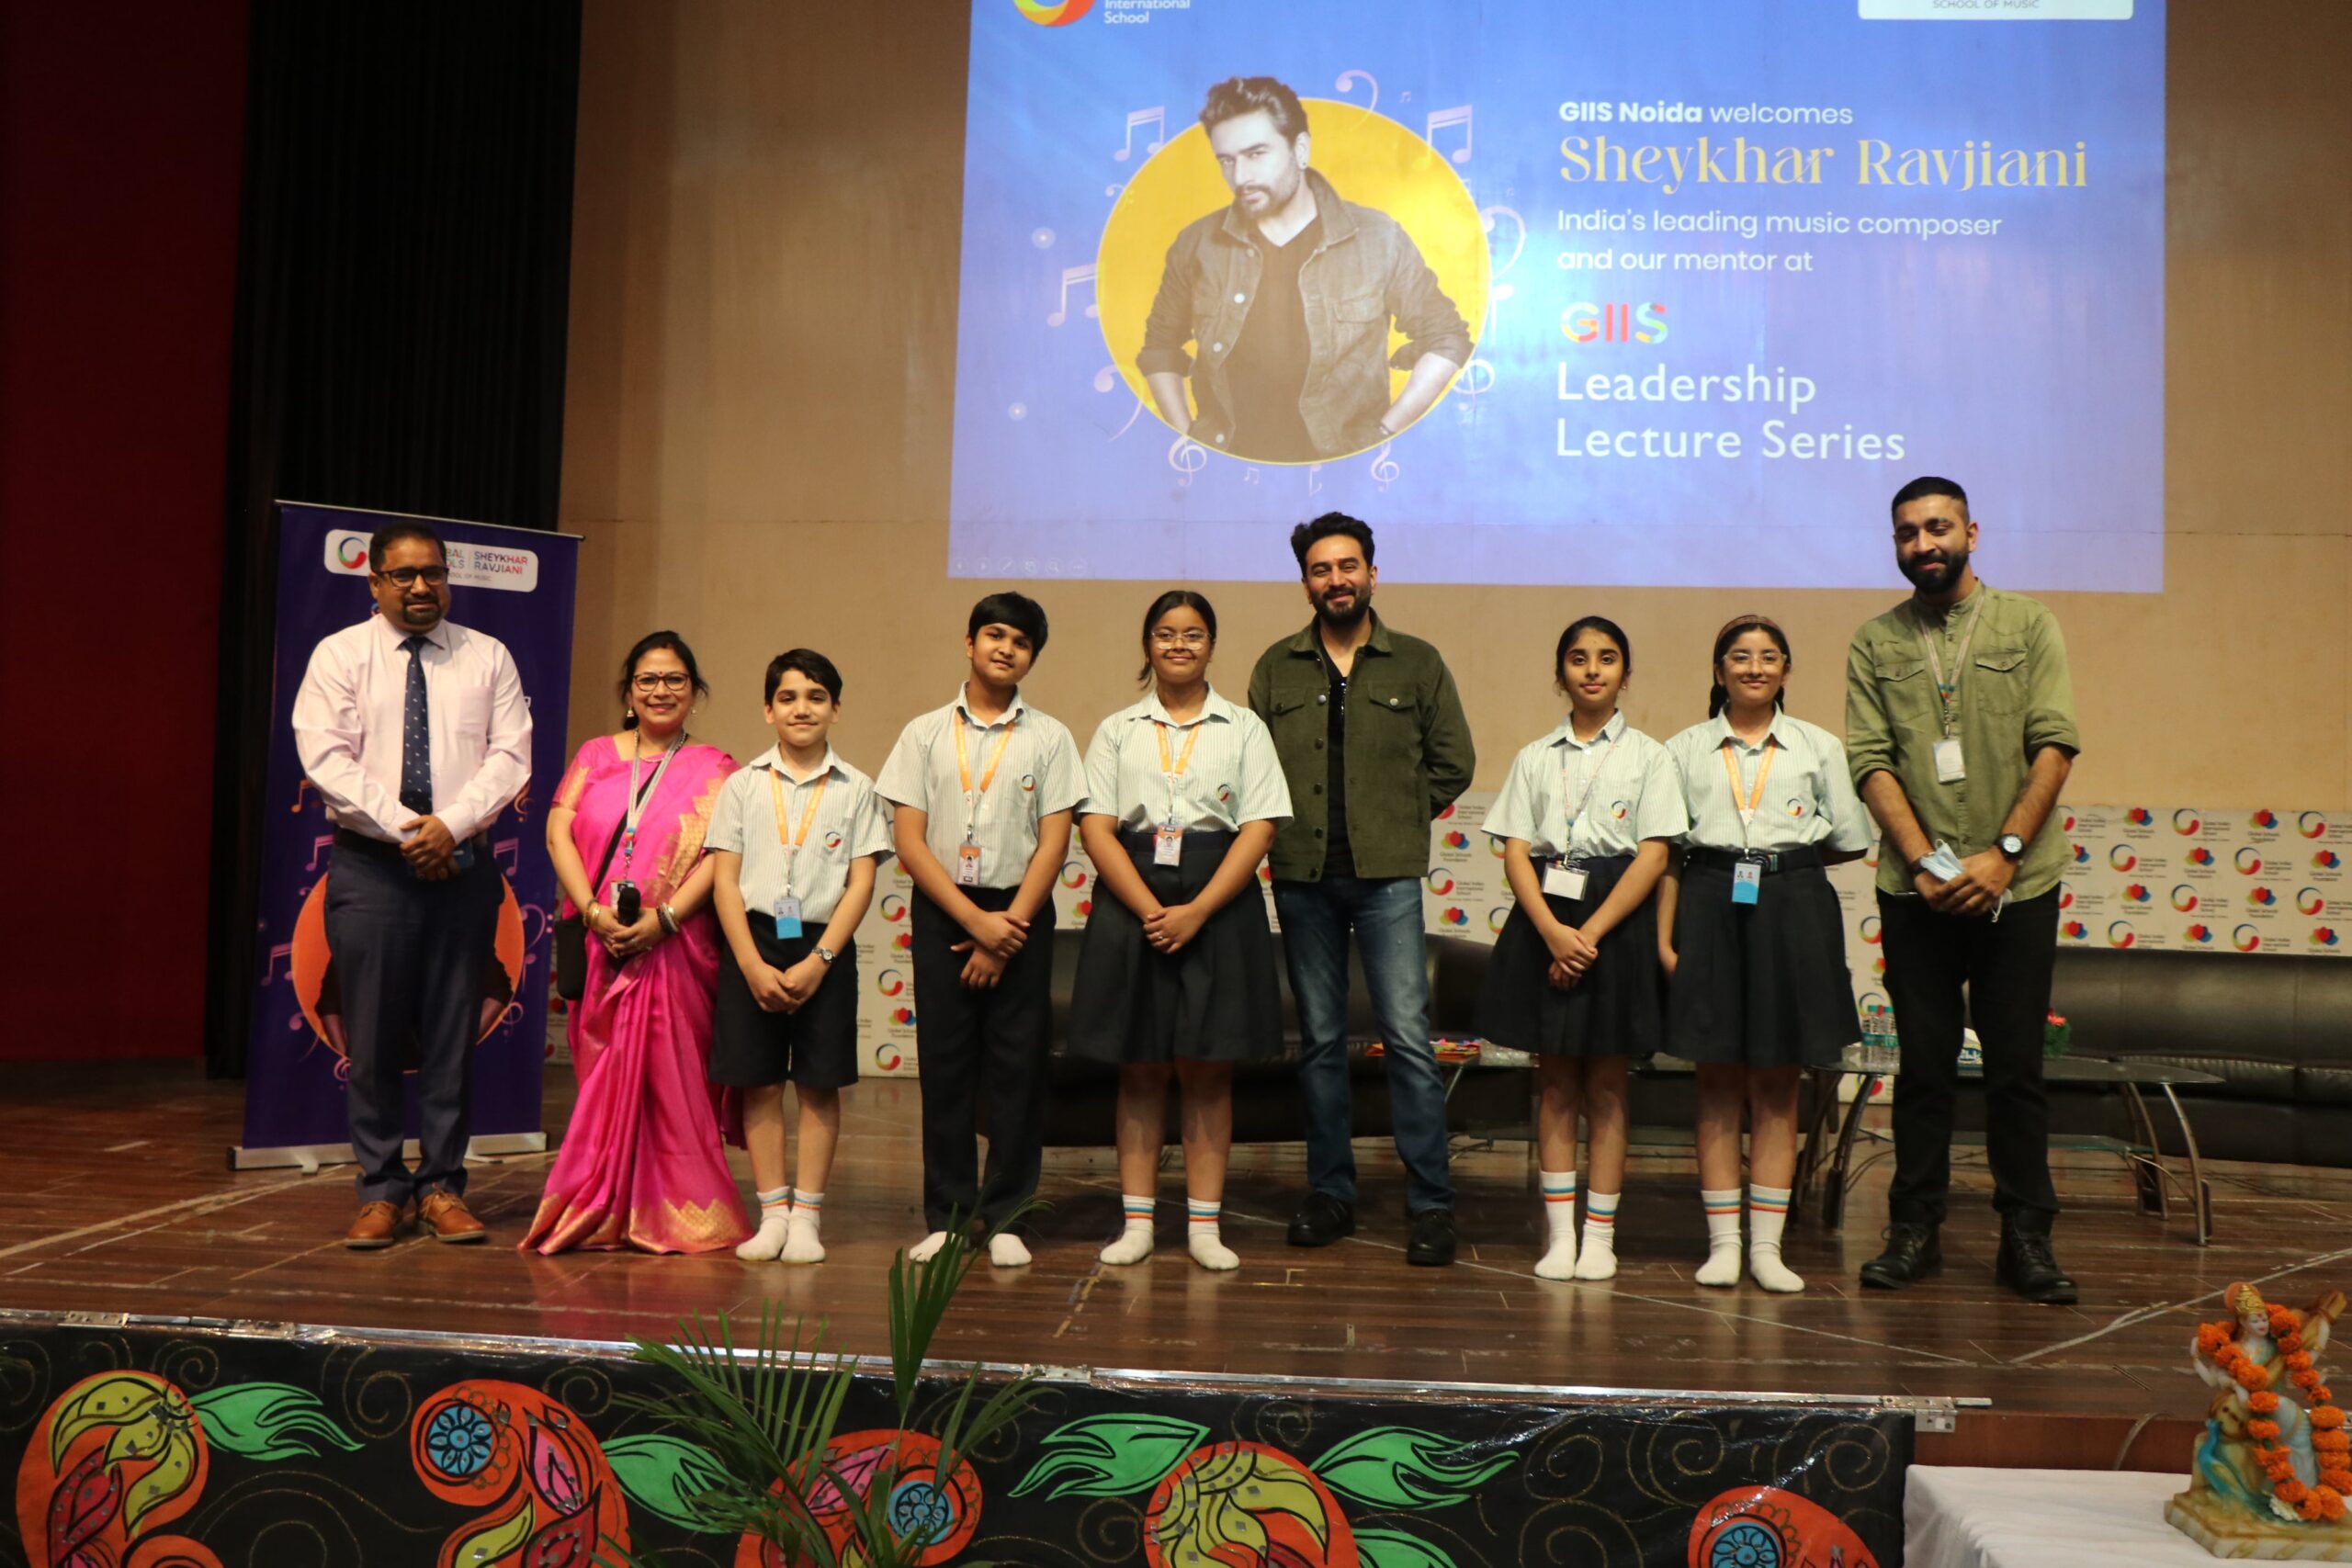 Sheykhar Ravjiani at the GIIS Leadership Lecture Series in Noida with talent show participants min scaled